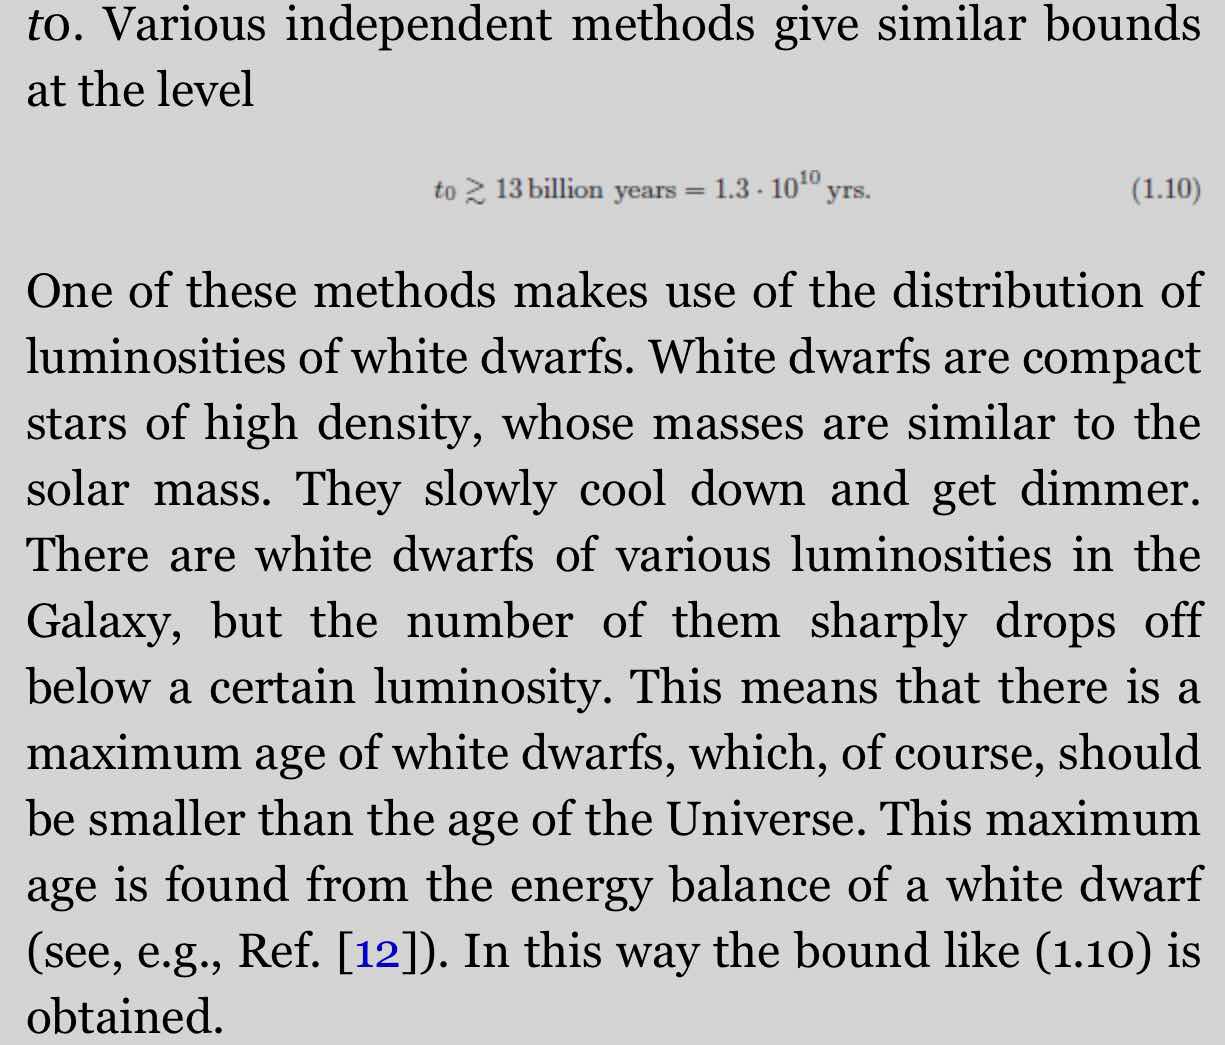 Sharp drop off of numbers of white dwarfs indicates maximum age of universe (Source: Rubakov & Gorbunkov, "Intro to Theory of the Early Universe: